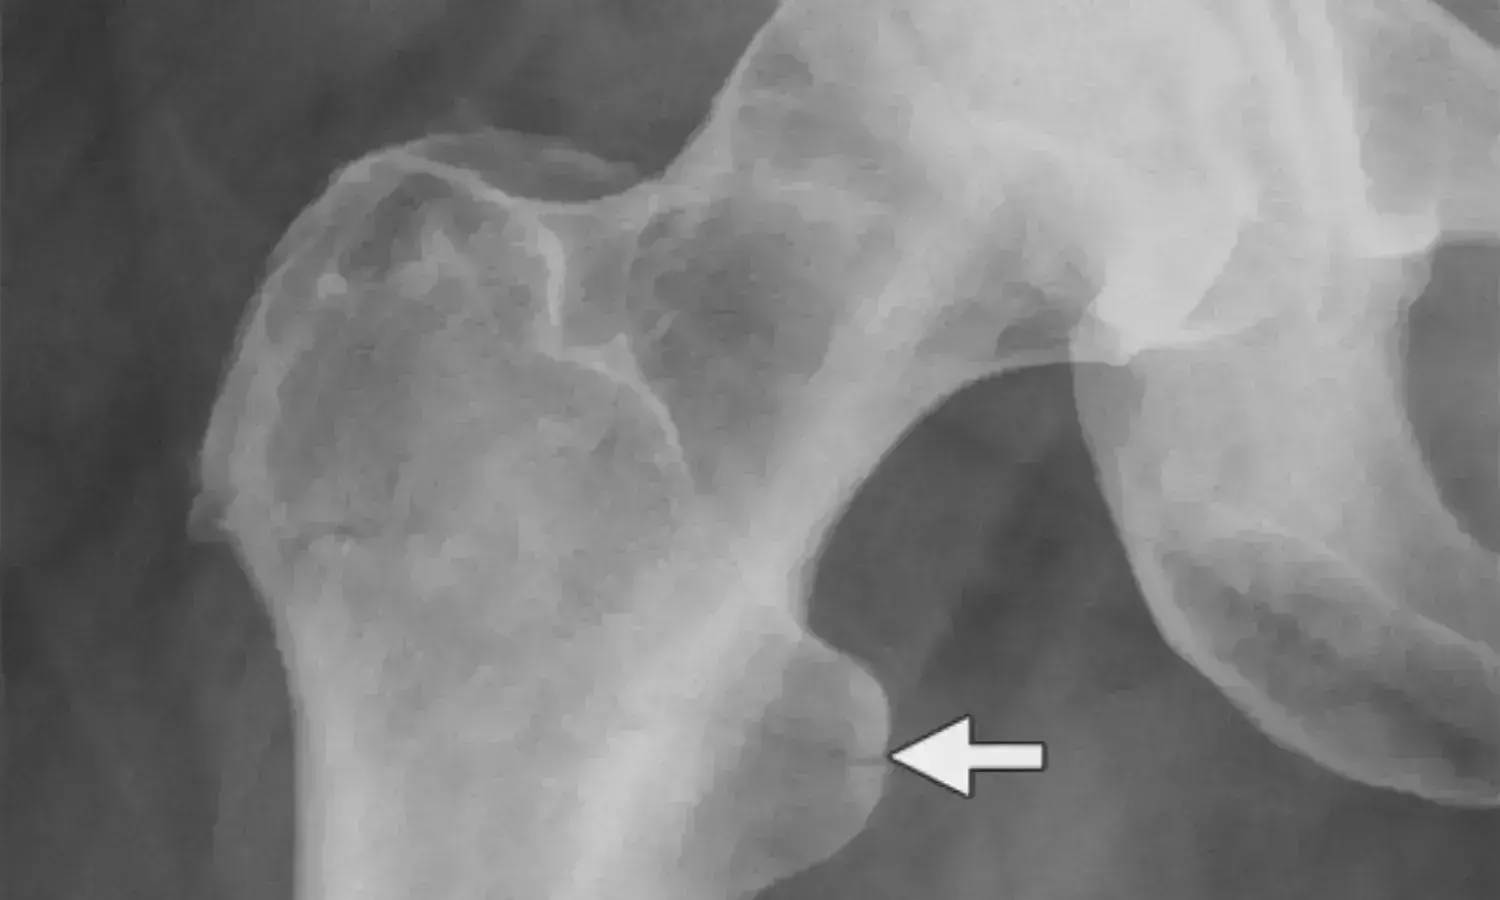 Longer Operation Time in Hip Hemiarthroplasty Increases Mortality and Complication Rates: Study